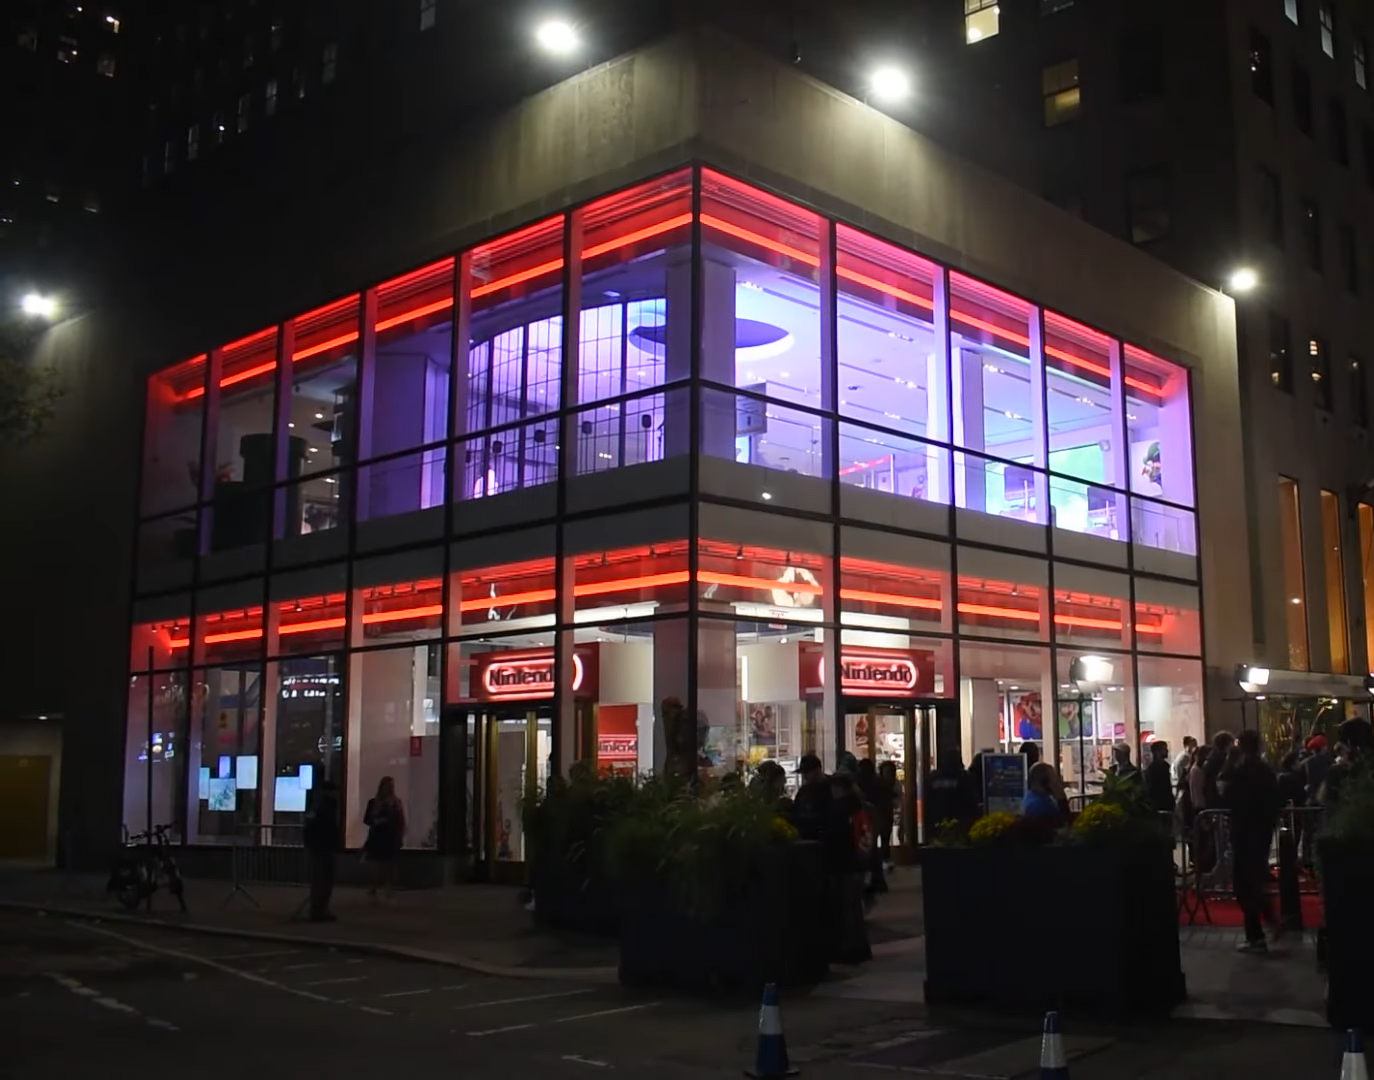 What is it like in the Nintendo store in New York City? - Quora